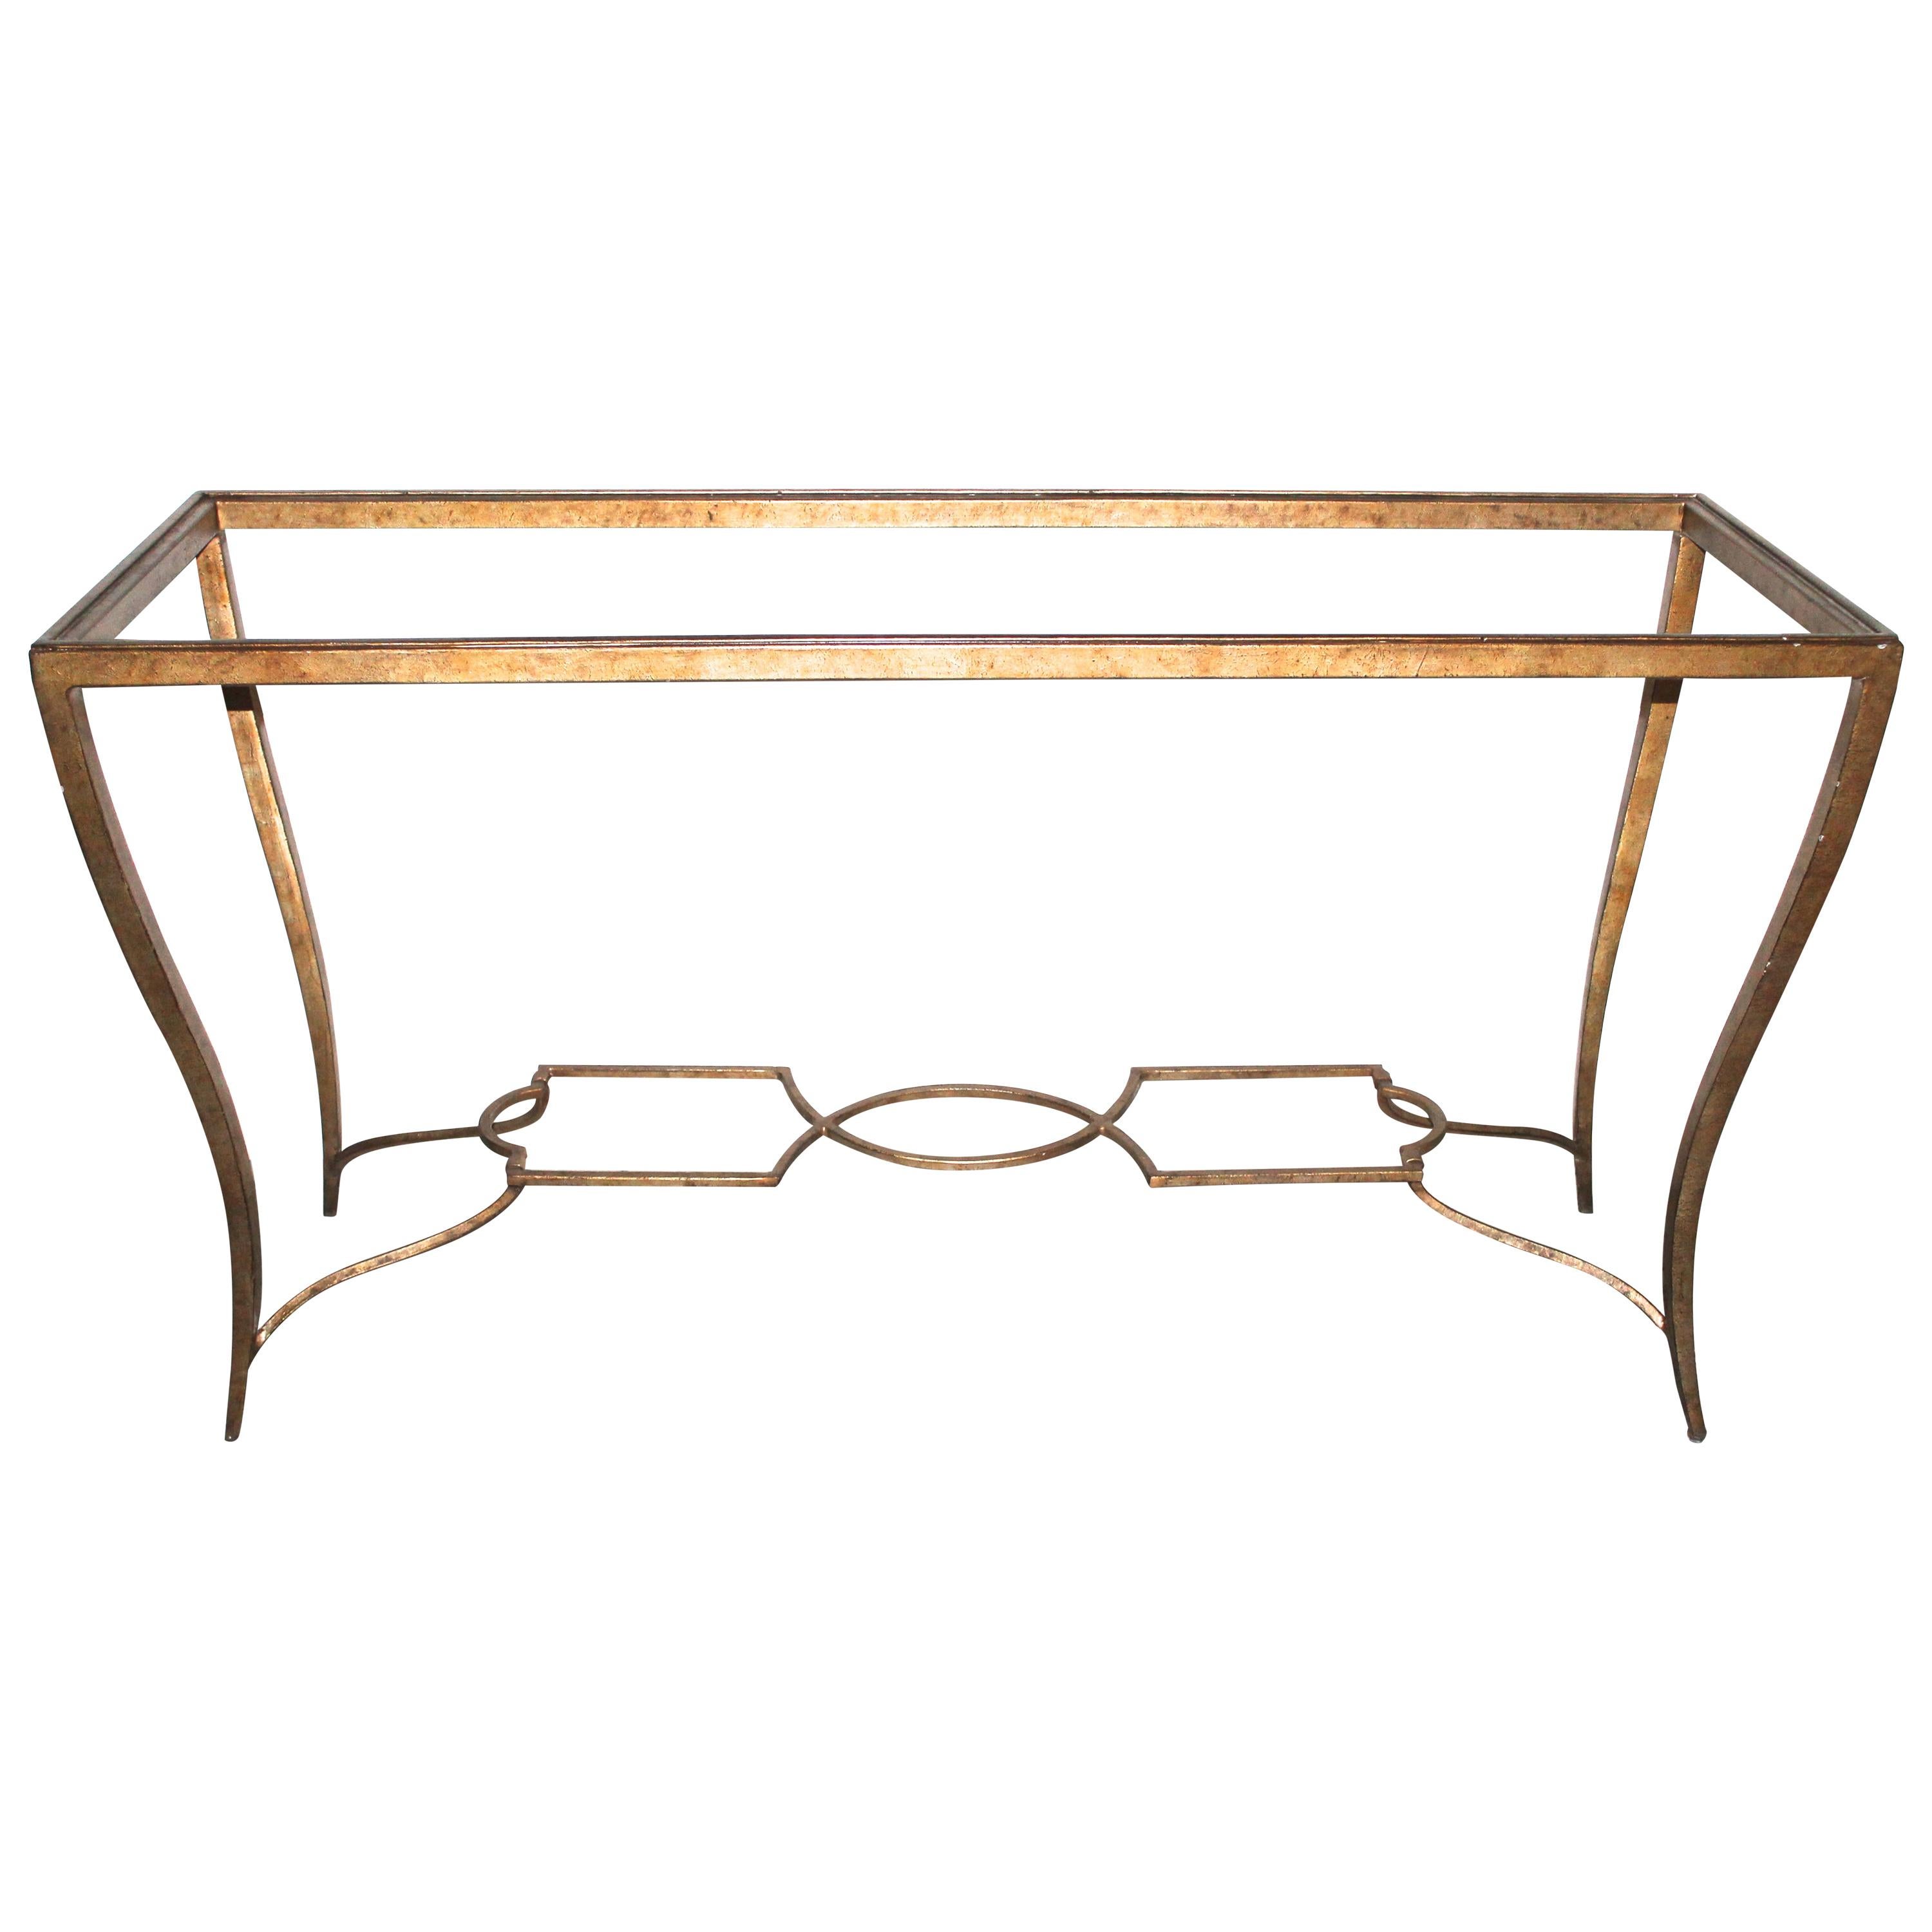 A beveled plate glass sits in a gilt painted wrought iron base with typical fluted curved Arbus signature legs, connected on the bottom with Classic shapes.